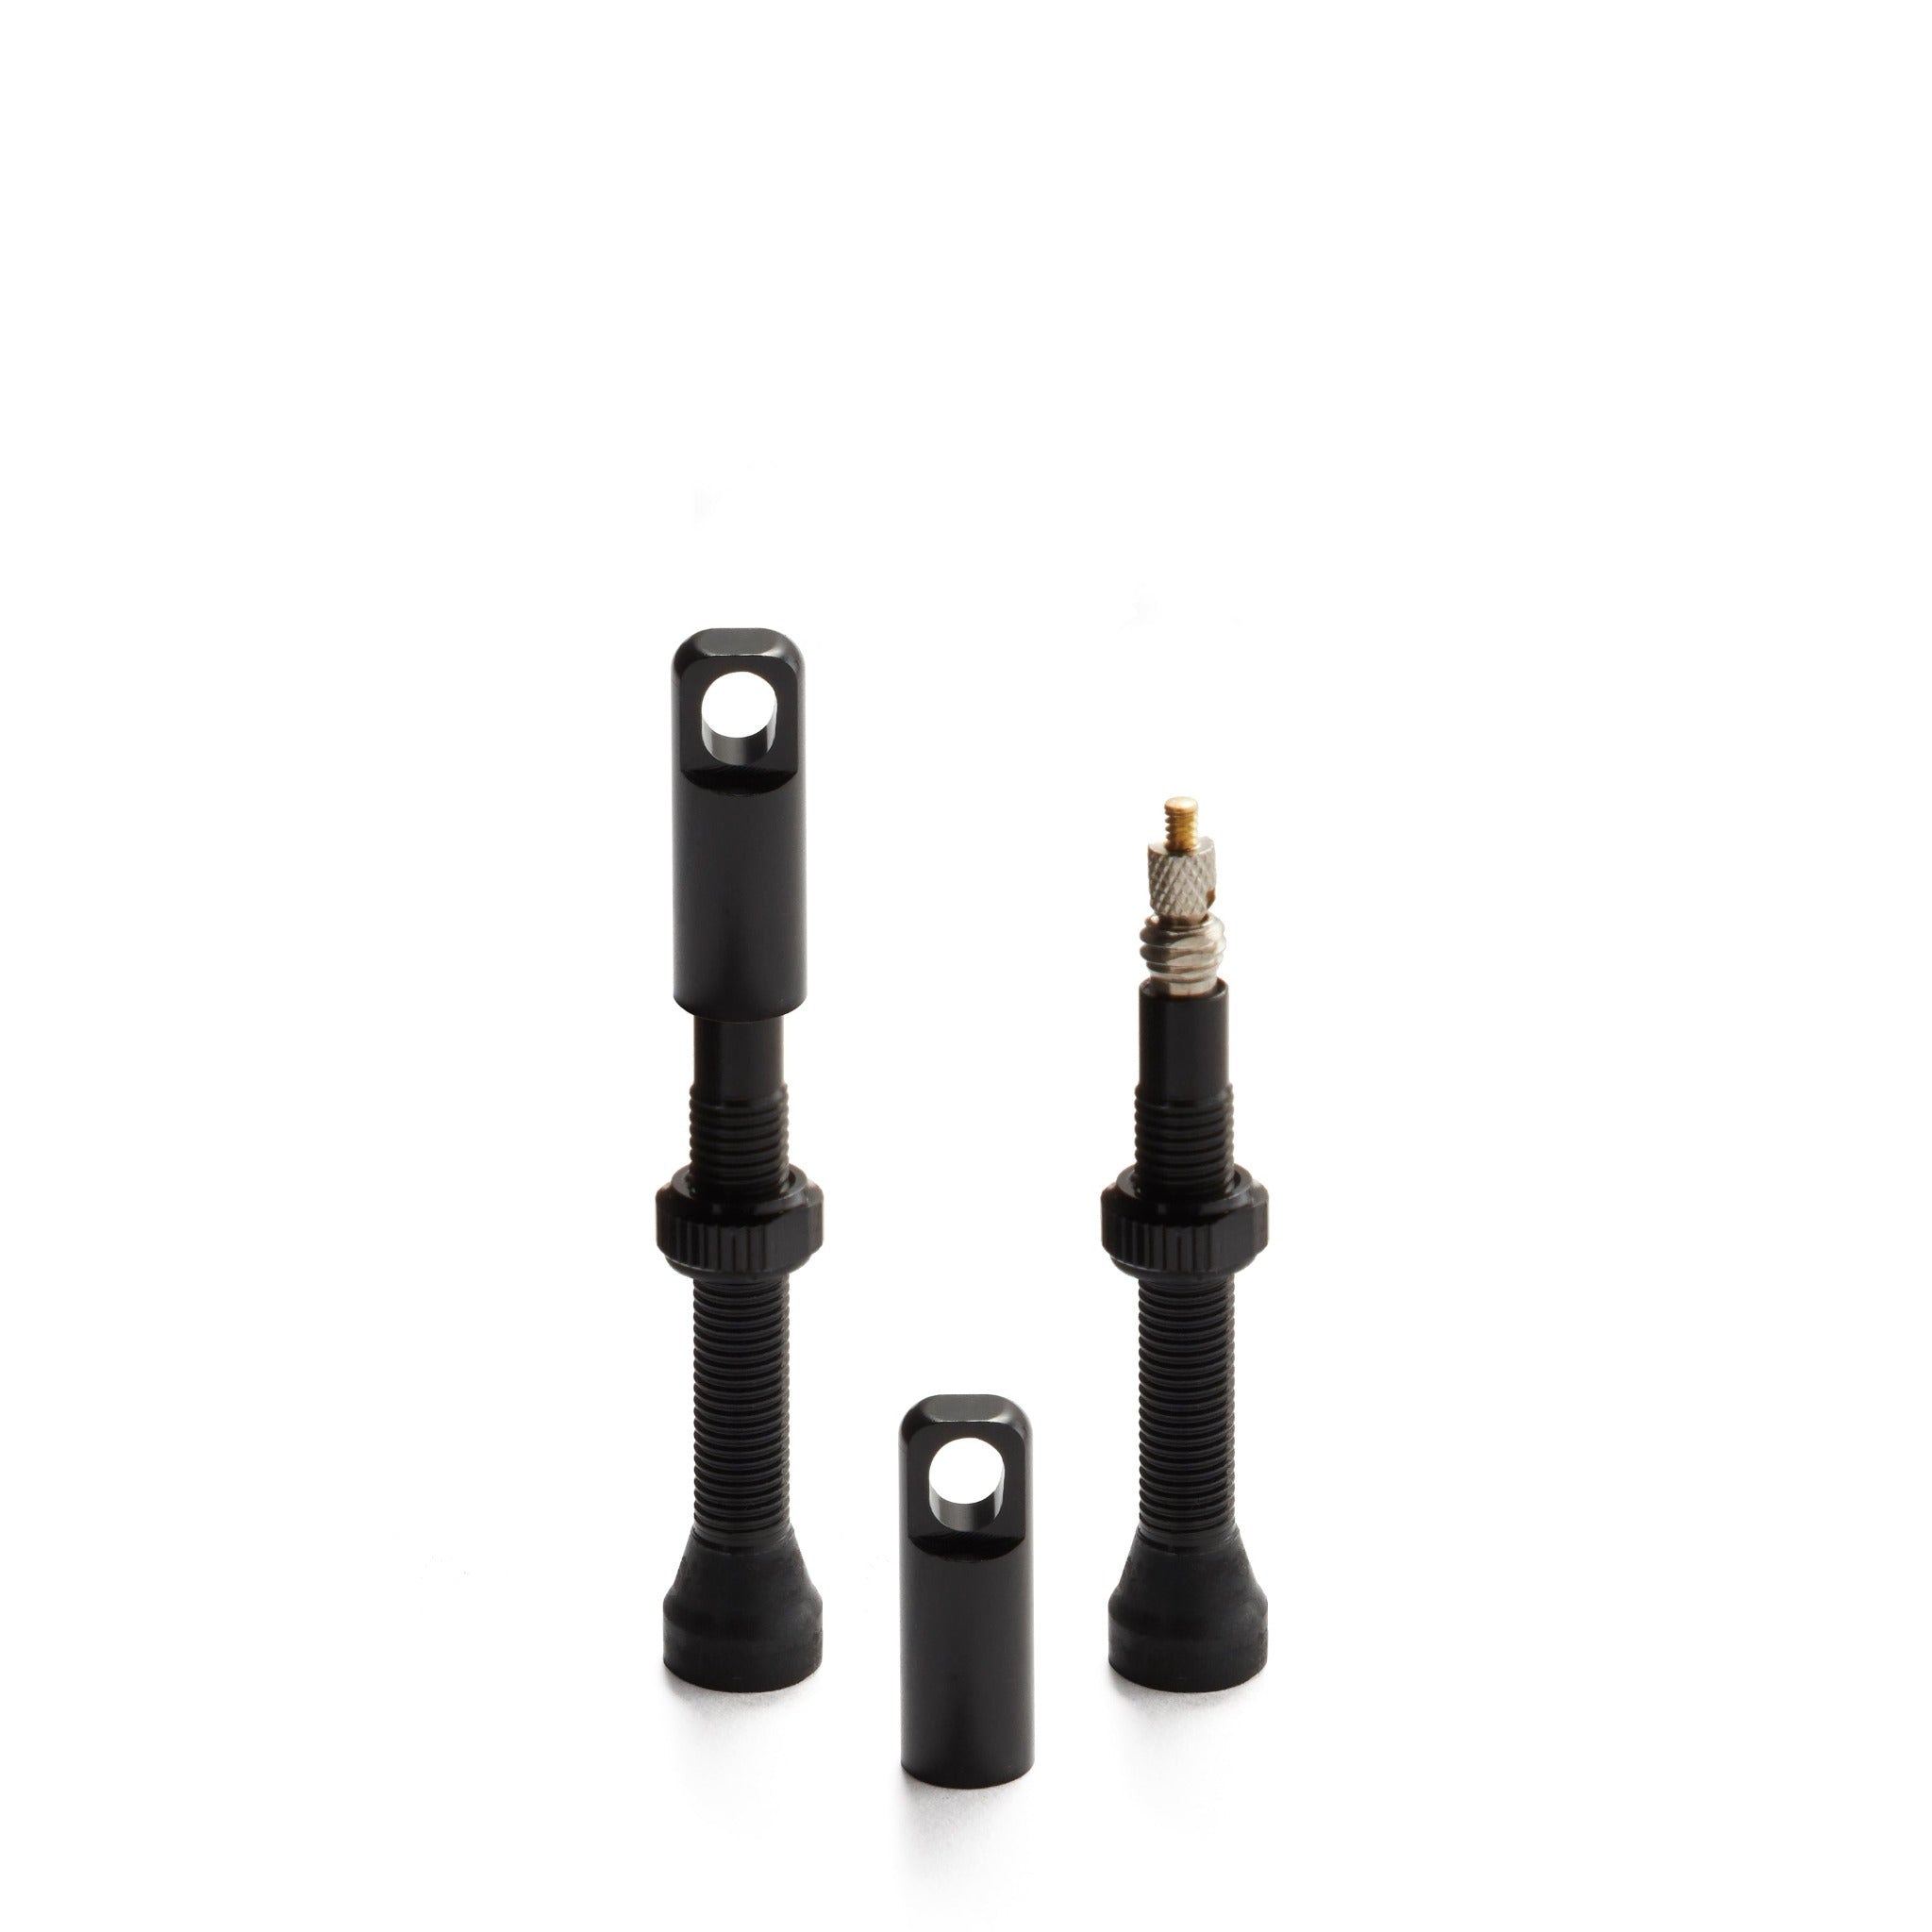 Tubeless Presta Valve Stems with Integrated Valve Core Tool - 44mm